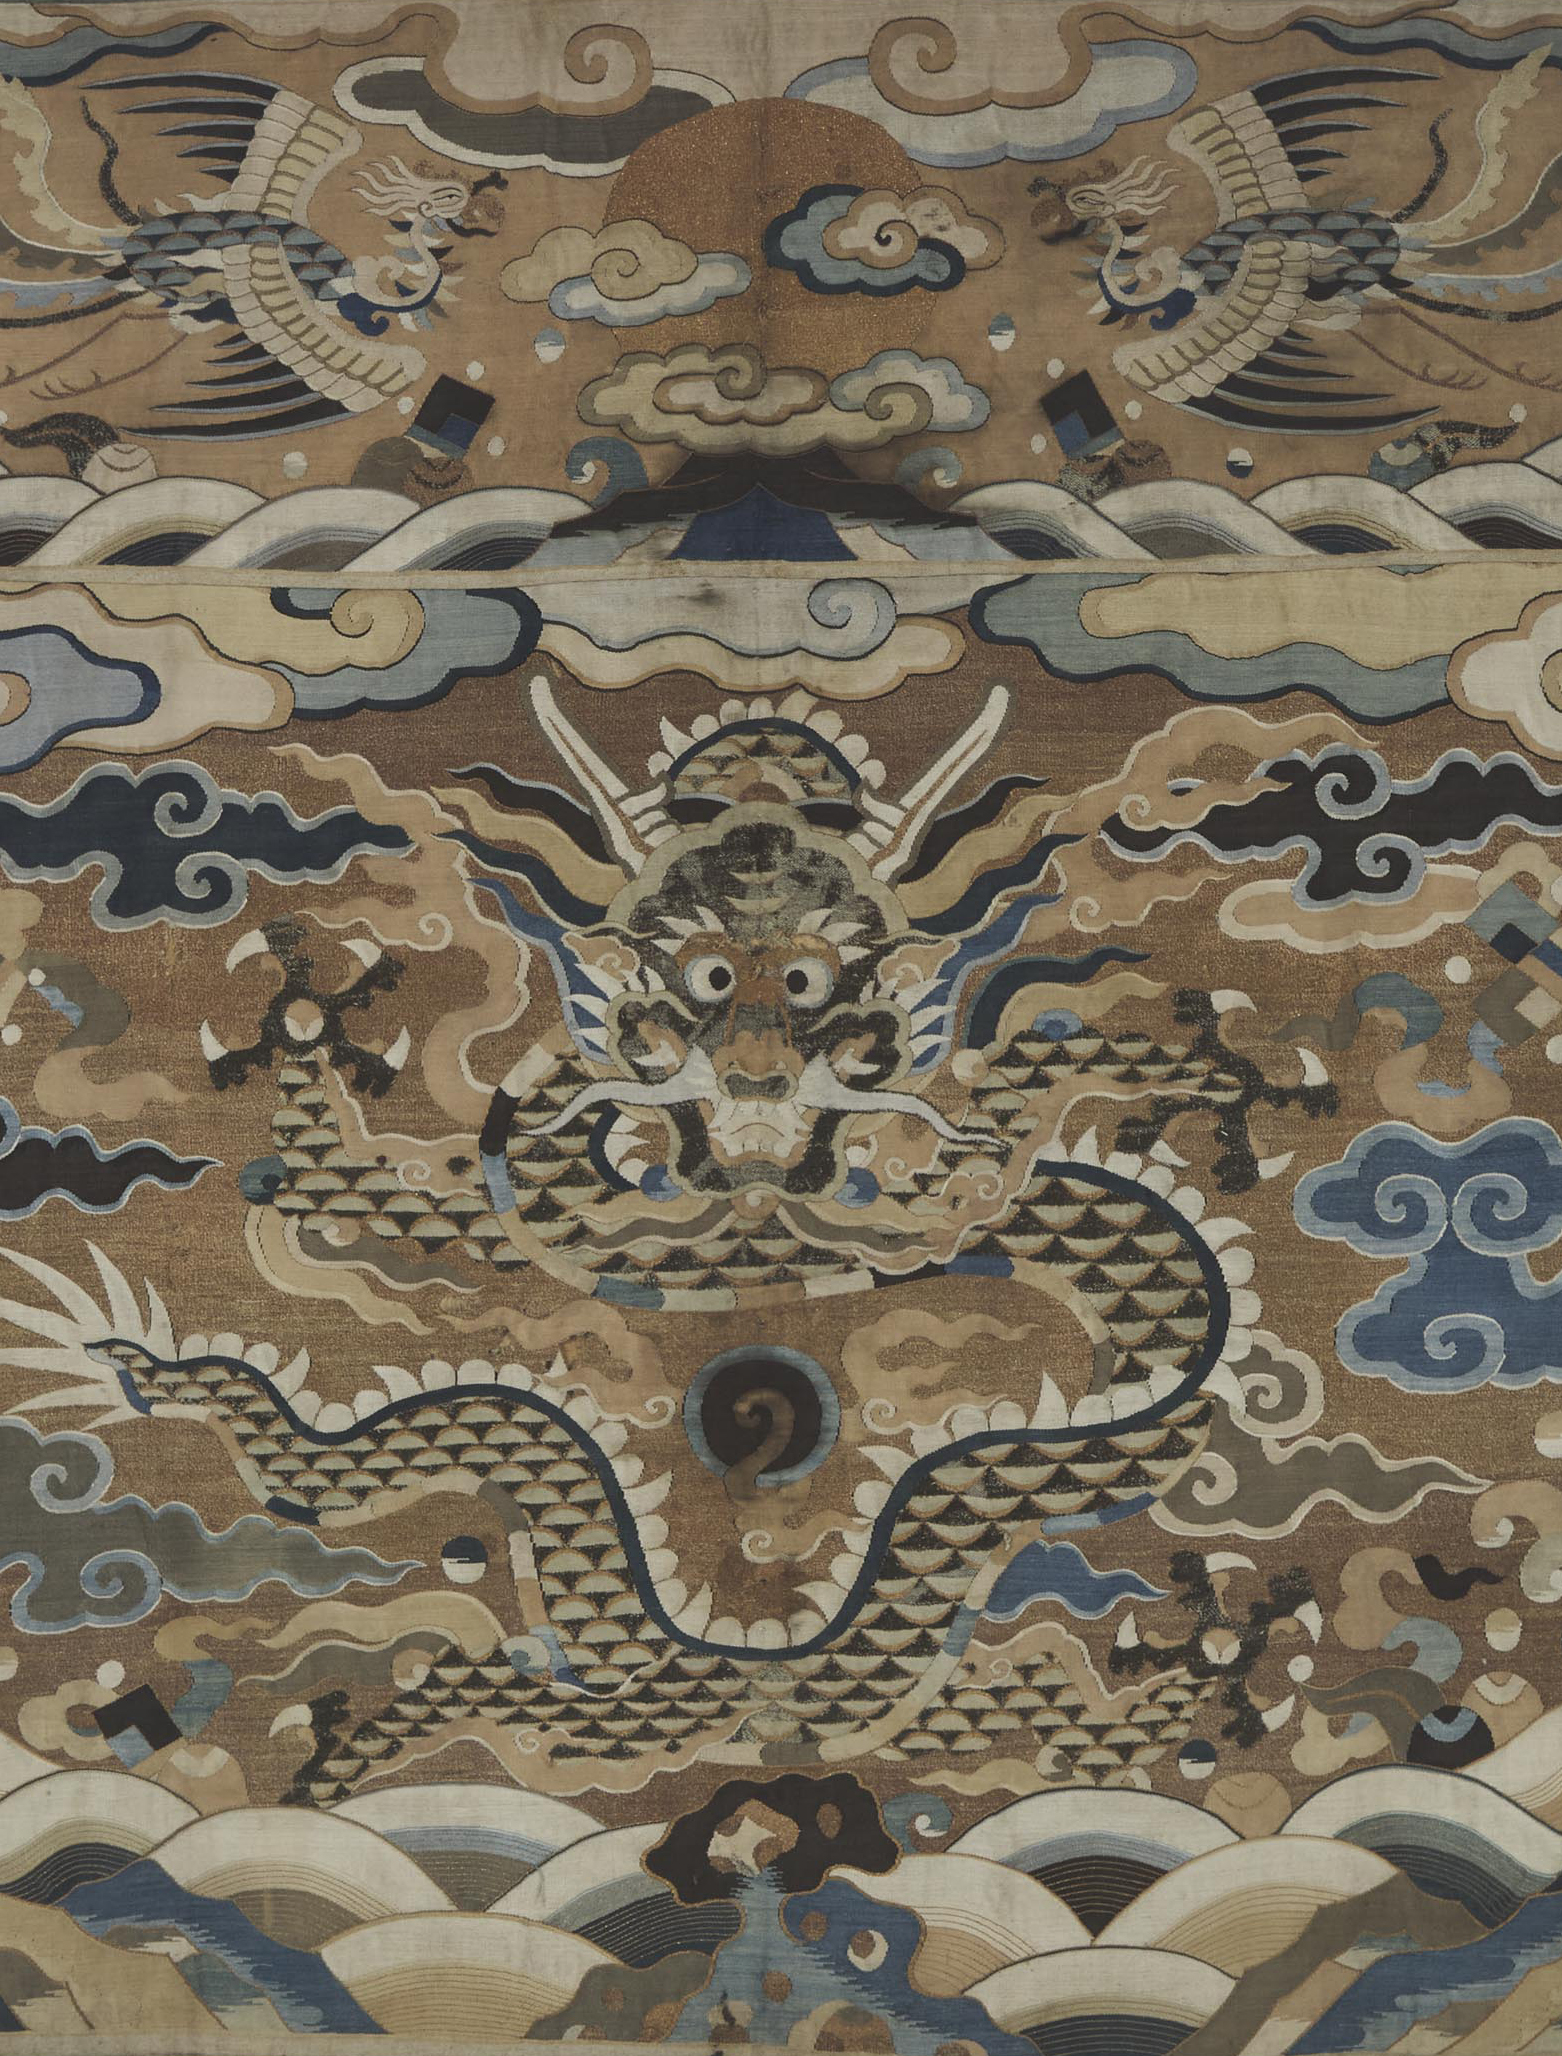 Dragons and Power: The Origin and Evolution of the Dragon Motif in Chinese Art History